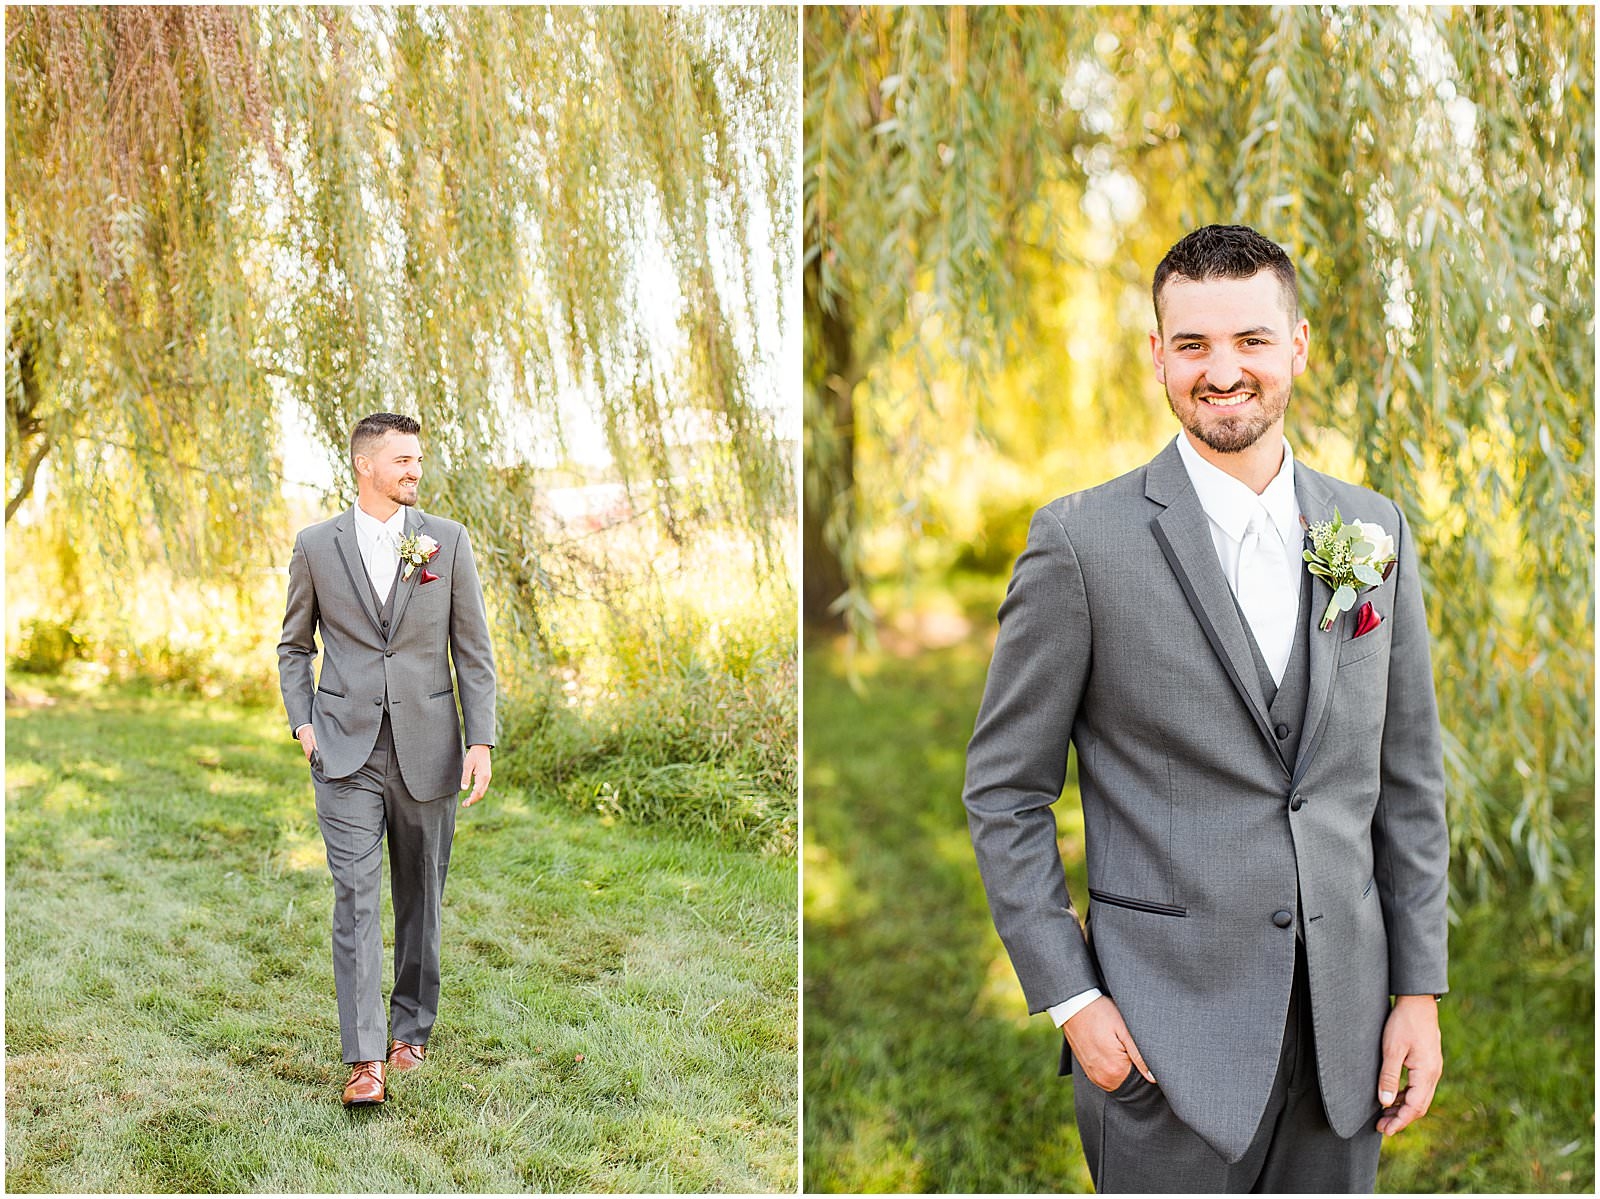 A Stunning Fall Wedding in Indianapolis, IN |. Sally and Andrew | Bret and Brandie Photography 0095.jpg